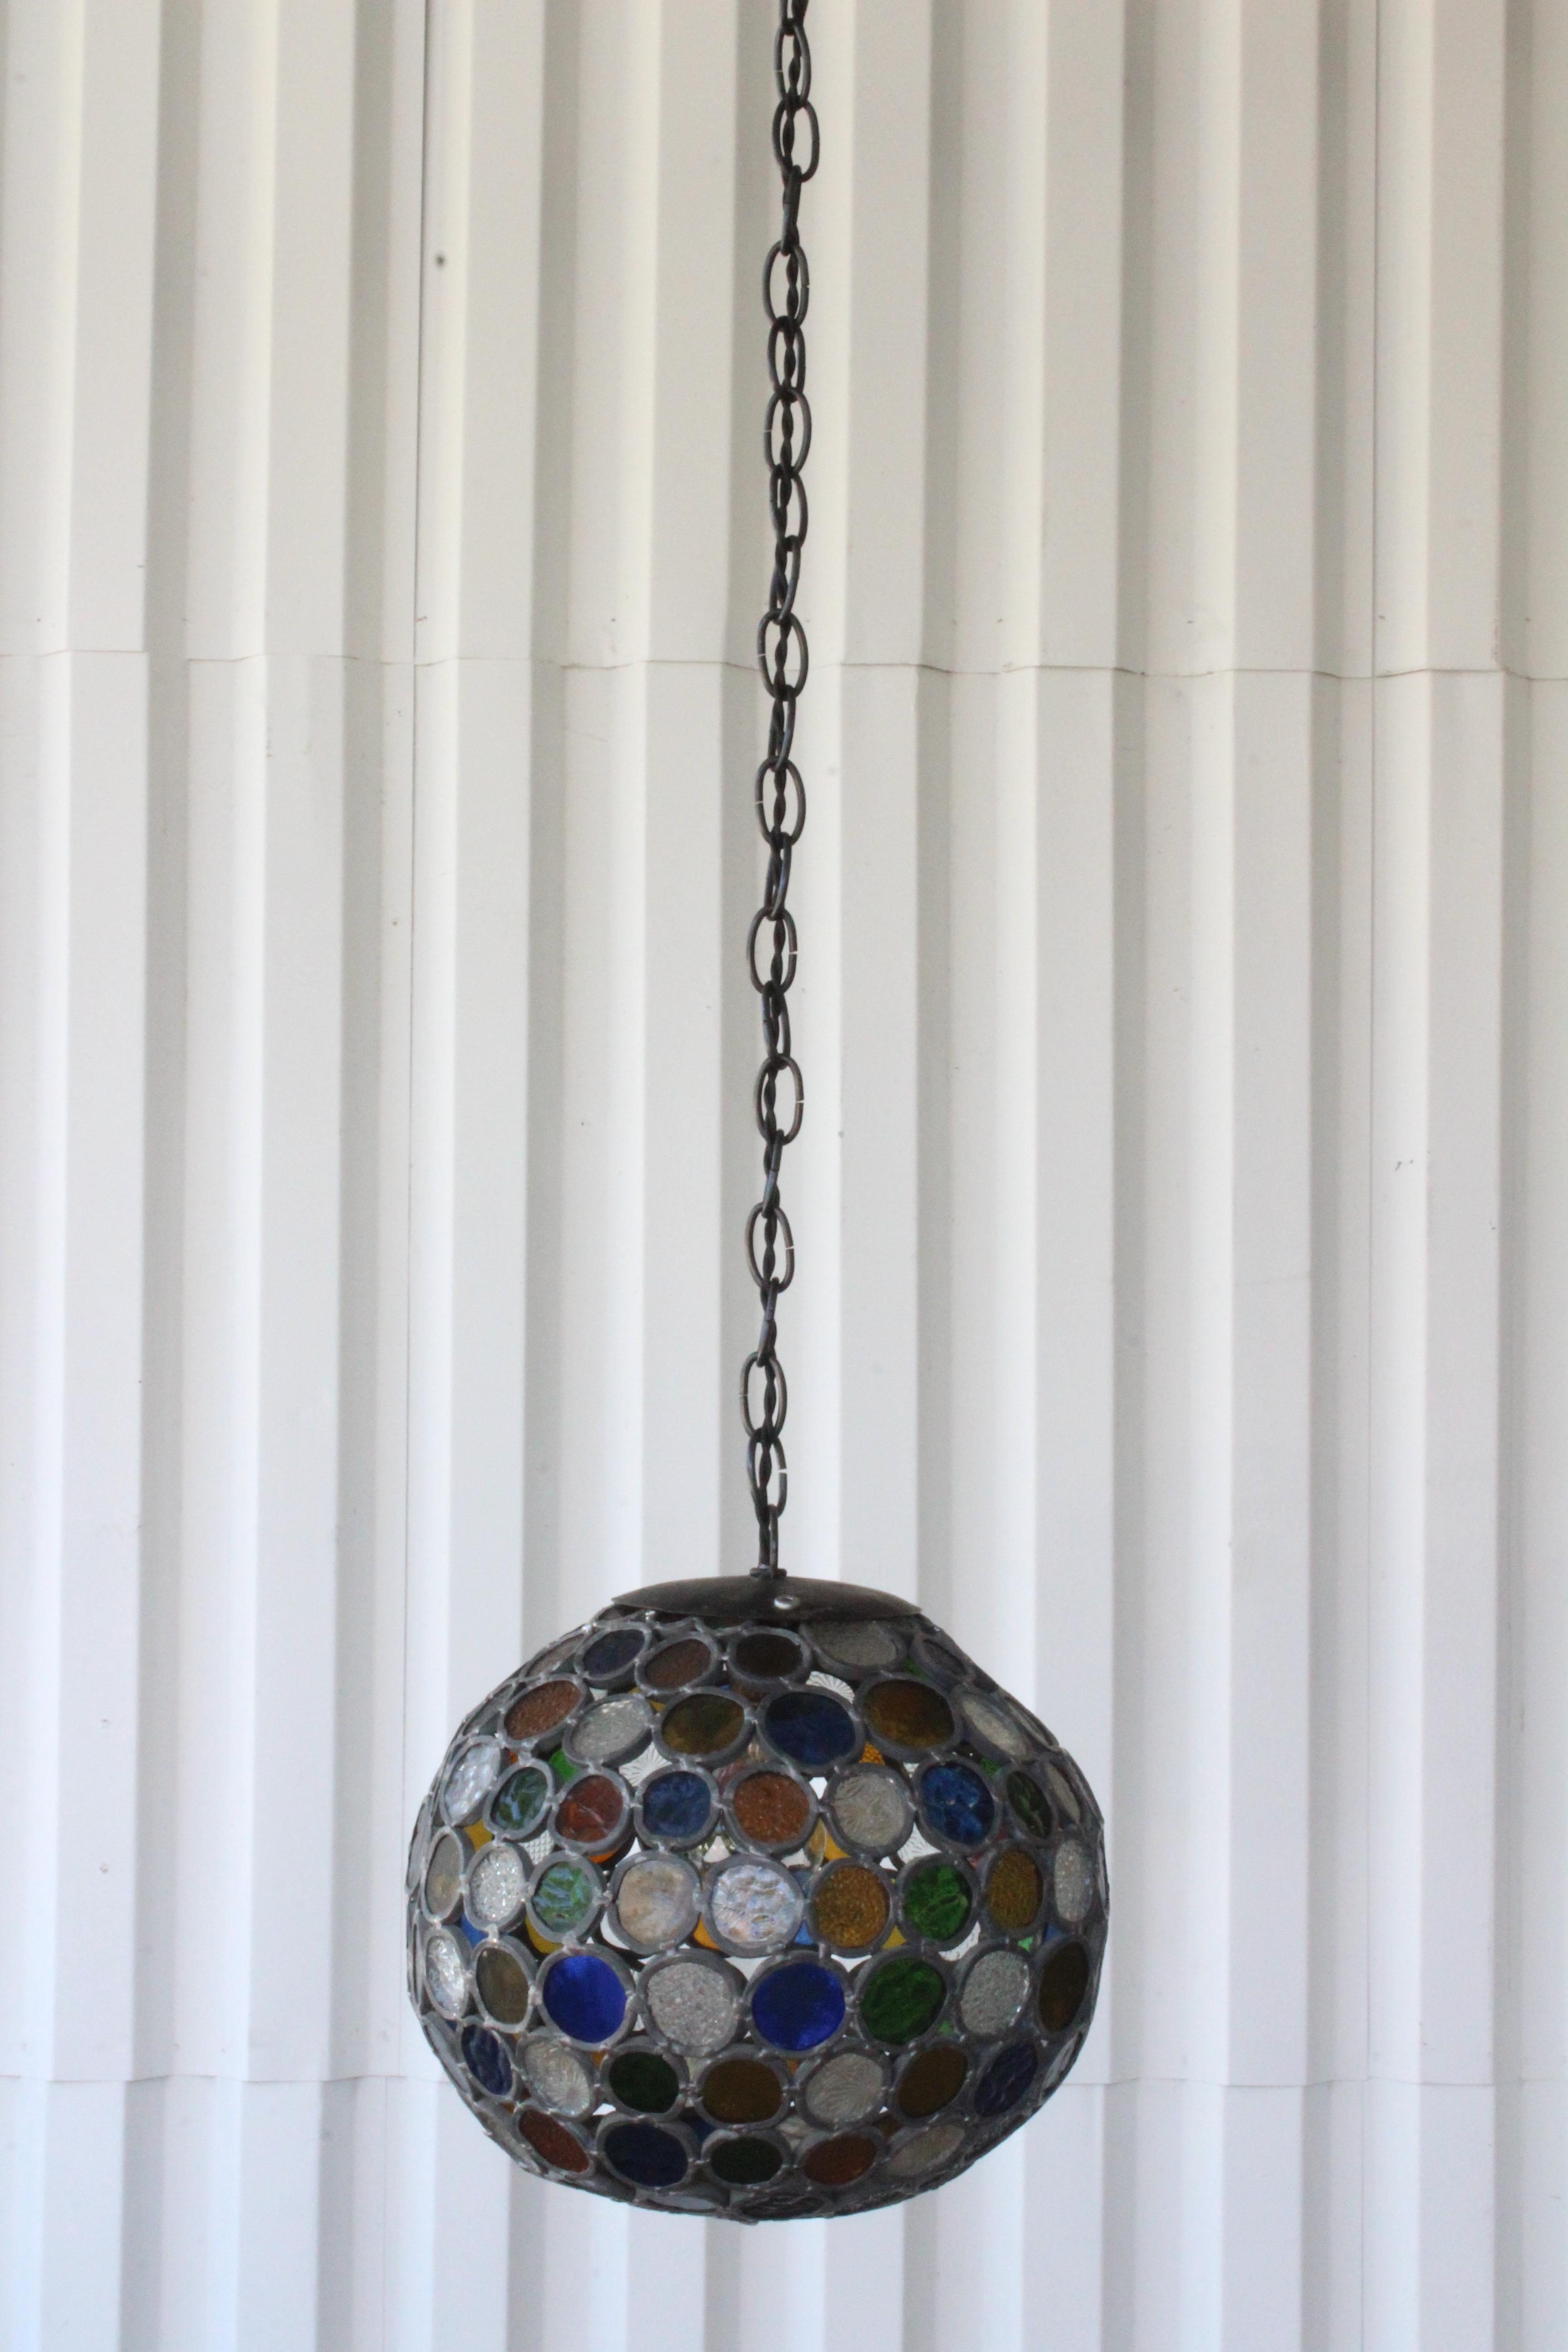 Beautiful one-of-a-kind hanging pendant light. Made of leaded stained glass in various colors, welded together to form a unique hanging fixture. Newly rewired. Uses one standard light bulb. Total height with chain is 50 inches. The fixture itself is